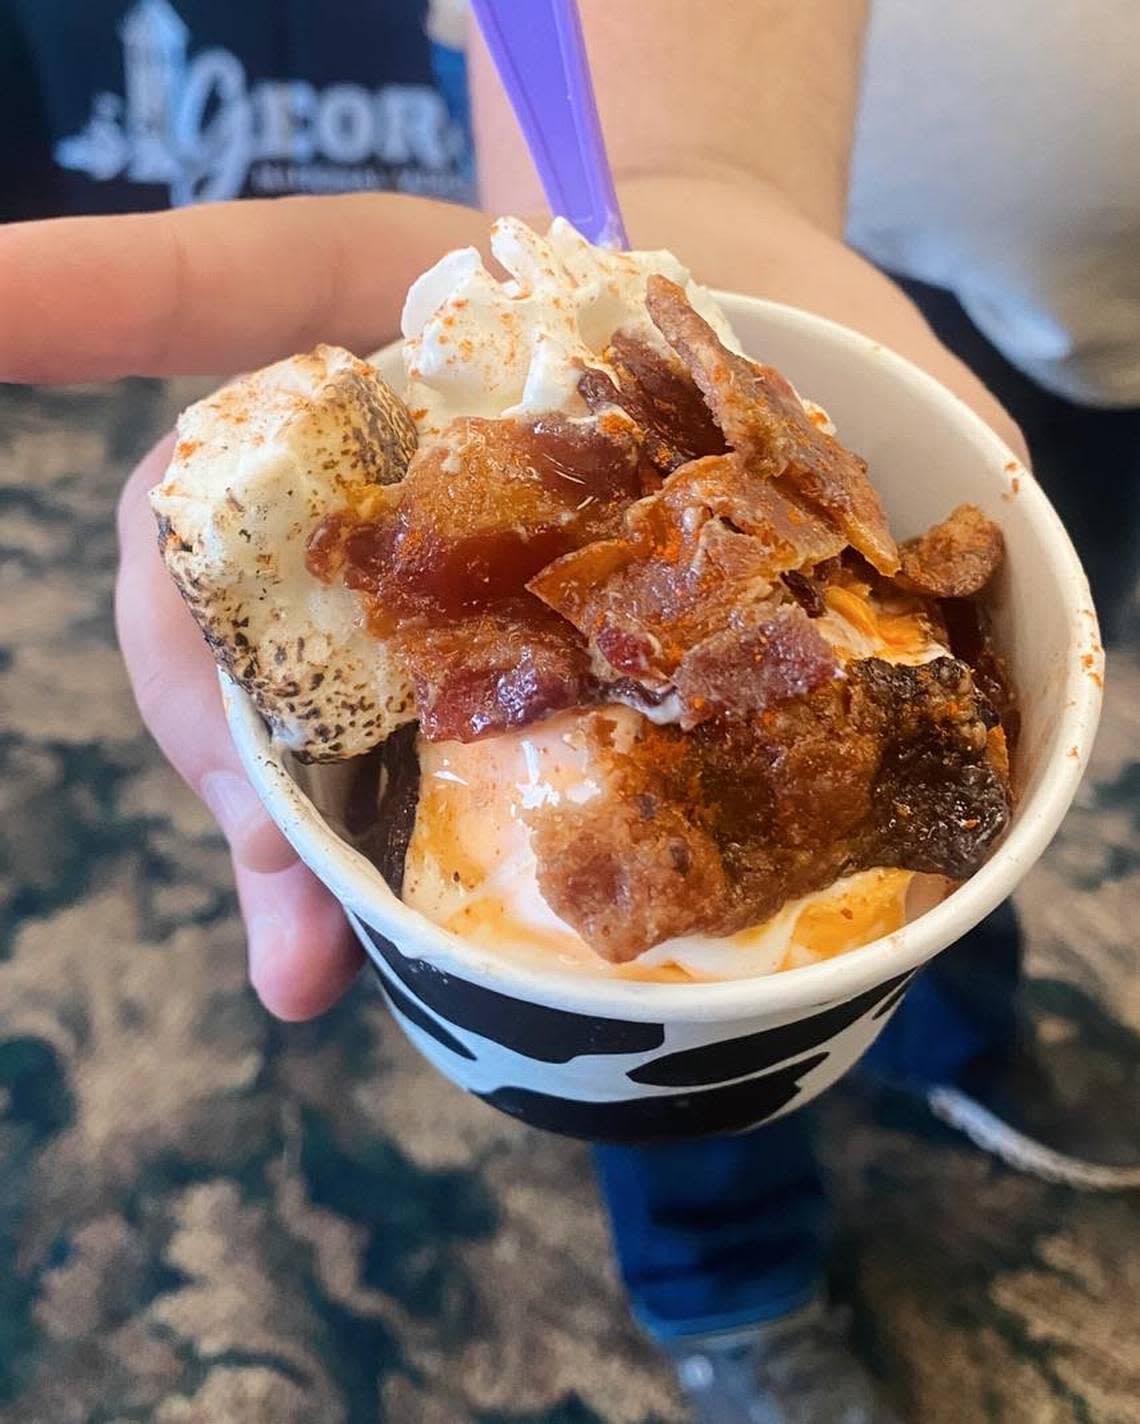 Southern Comfort Sundae at Polar Bear Ice Cream: homemade sweet potato ice cream with torched marshmallow, waffles, brown sugar, maple syrup, candied bacon, strawberries with a pinch of cayenne pepper